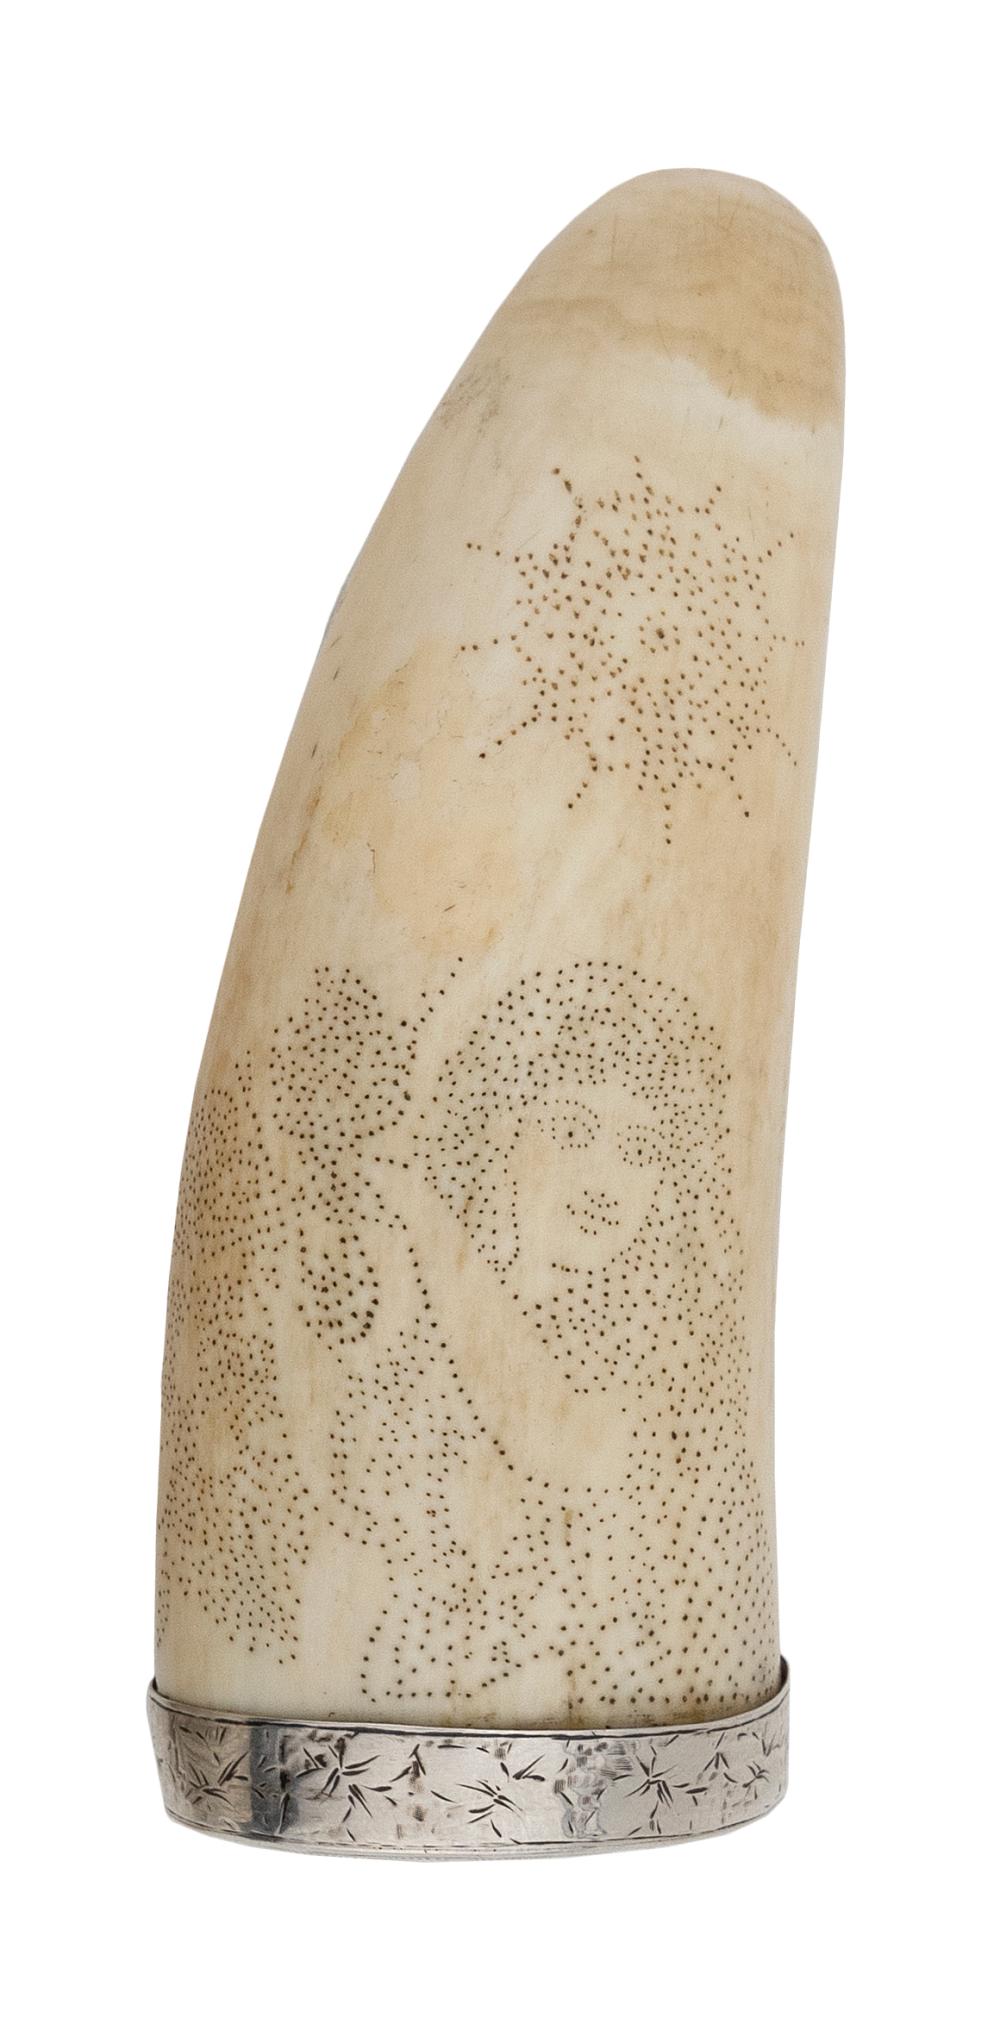 PINPOINT SCRIMSHAW WHALE'S TOOTH